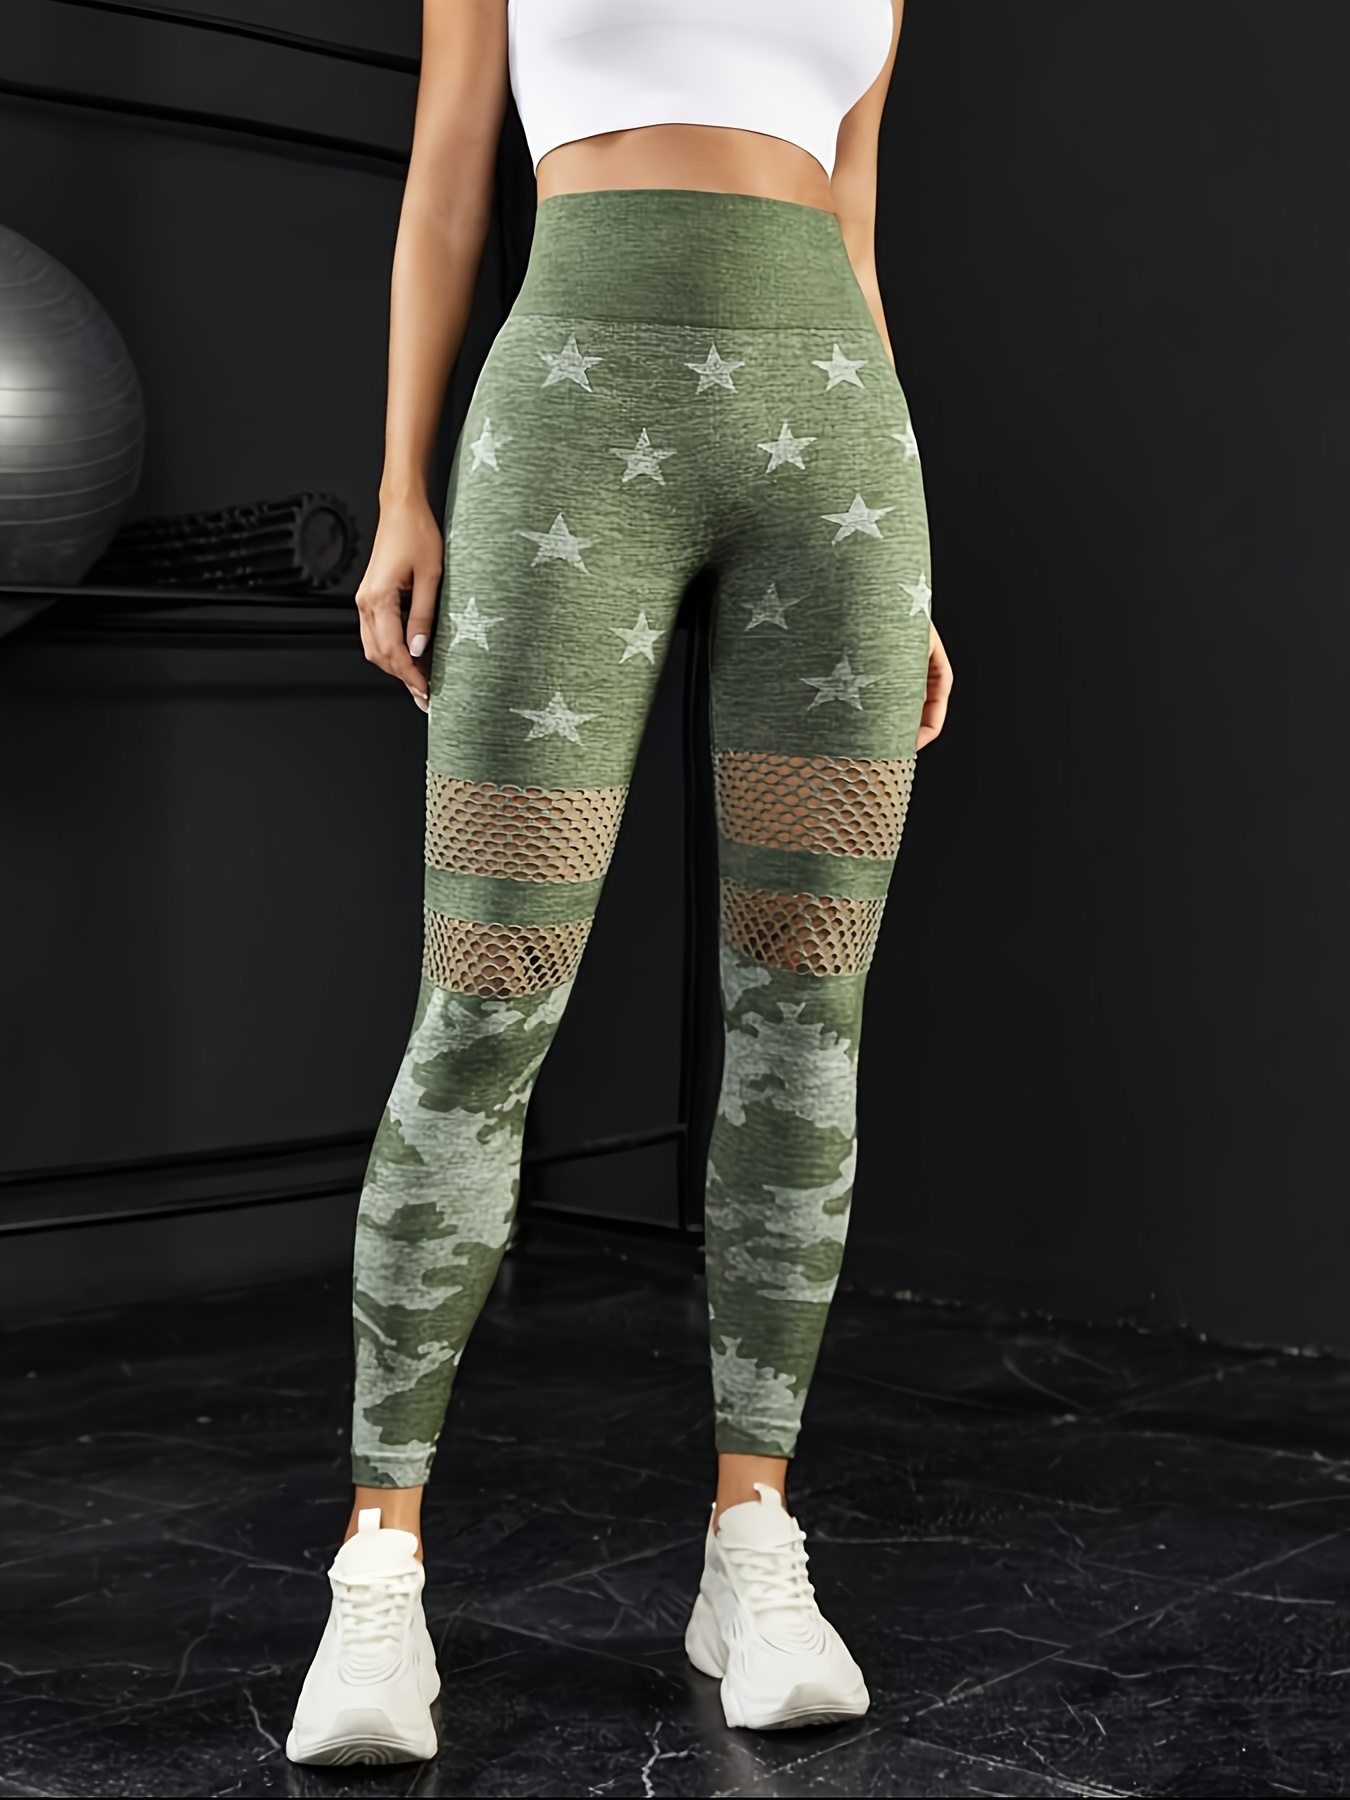 Star & Camouflage Pattern High Waist Sports Leggings, Quick Drying High  Stretch Fitness Running Hollow Workout Yoga Tight Pants, Women's Activewear